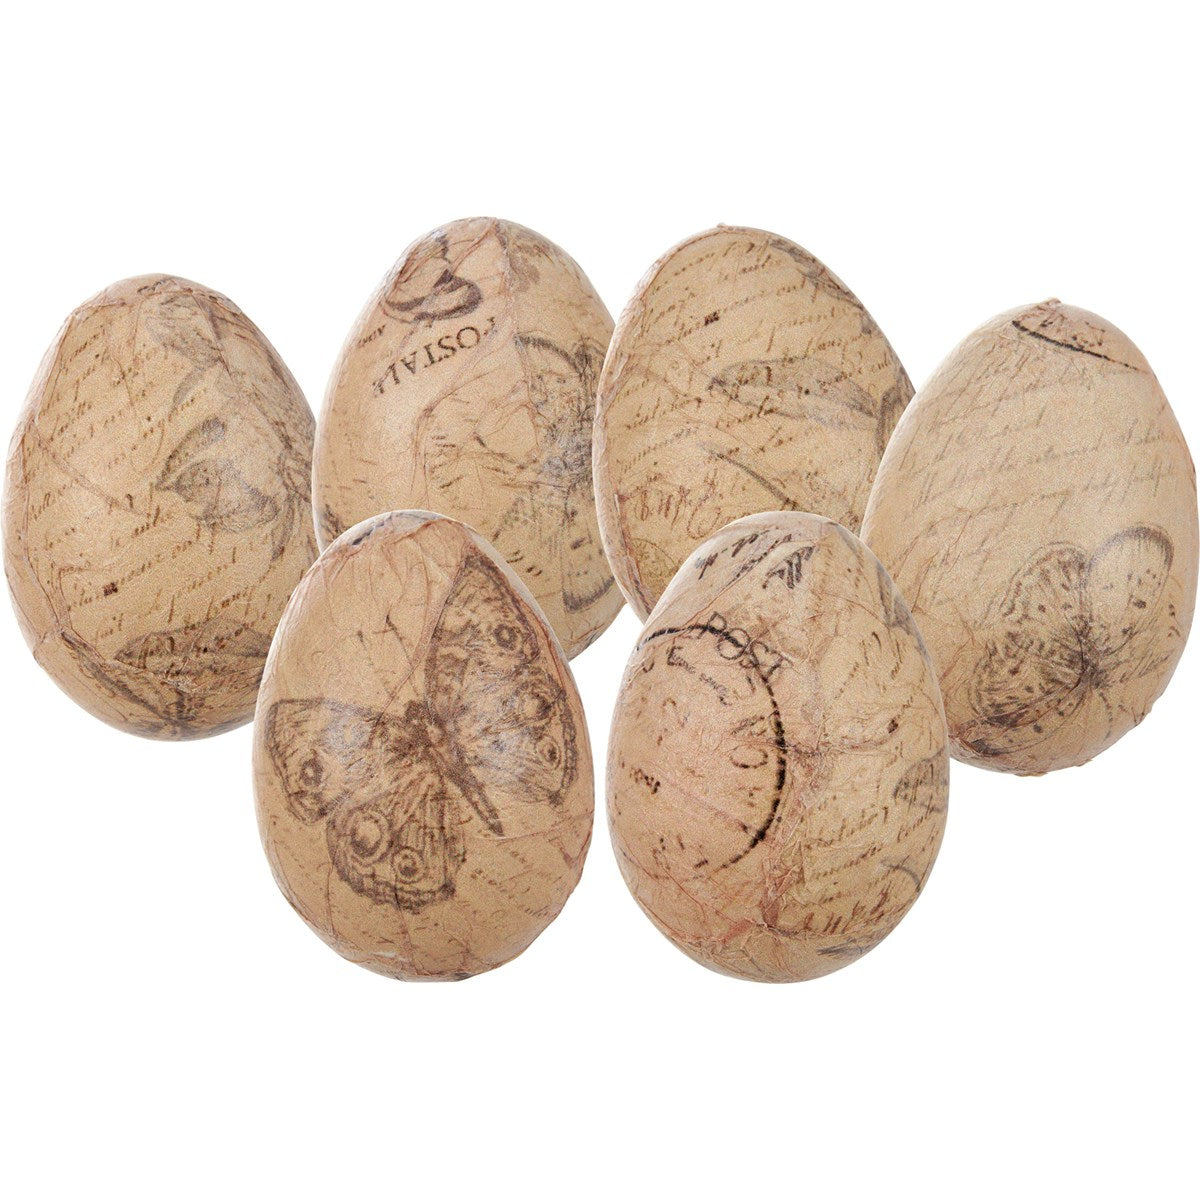 💙 Set of 6 Vintage-Style Paper Wooden Eggs